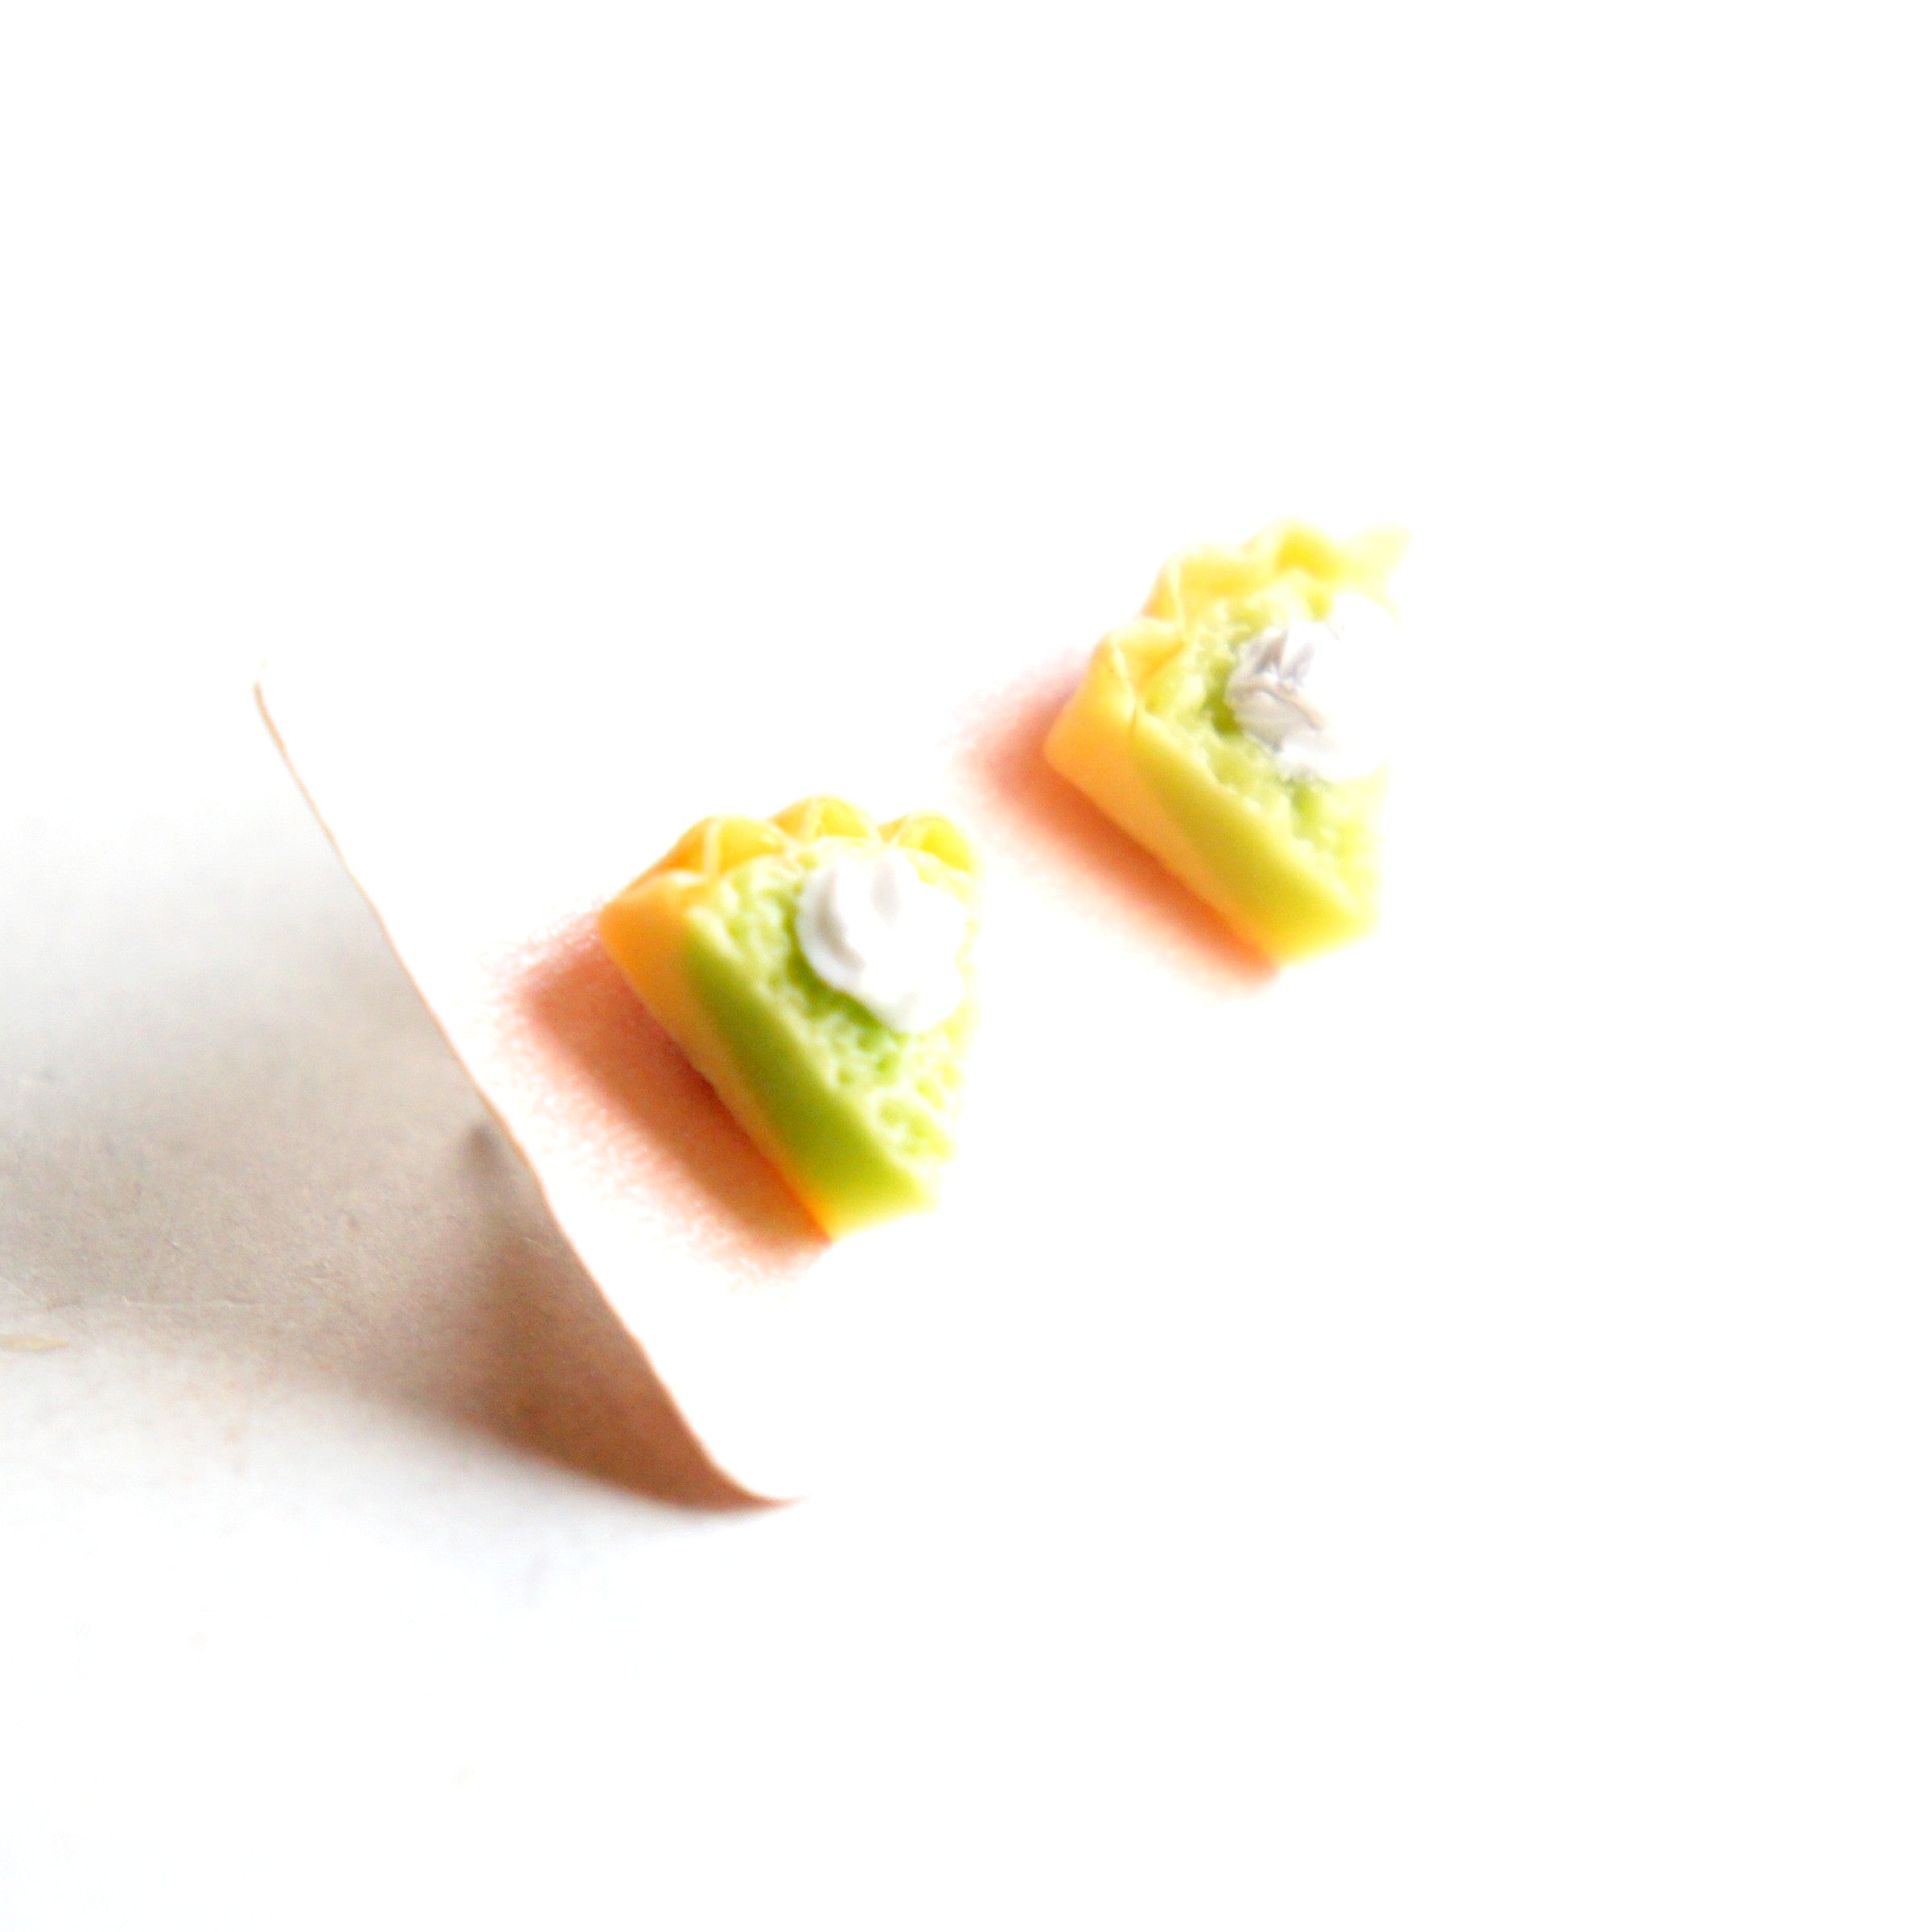 Key Lime Pie Stud Earrings - Jillicious charms and accessories